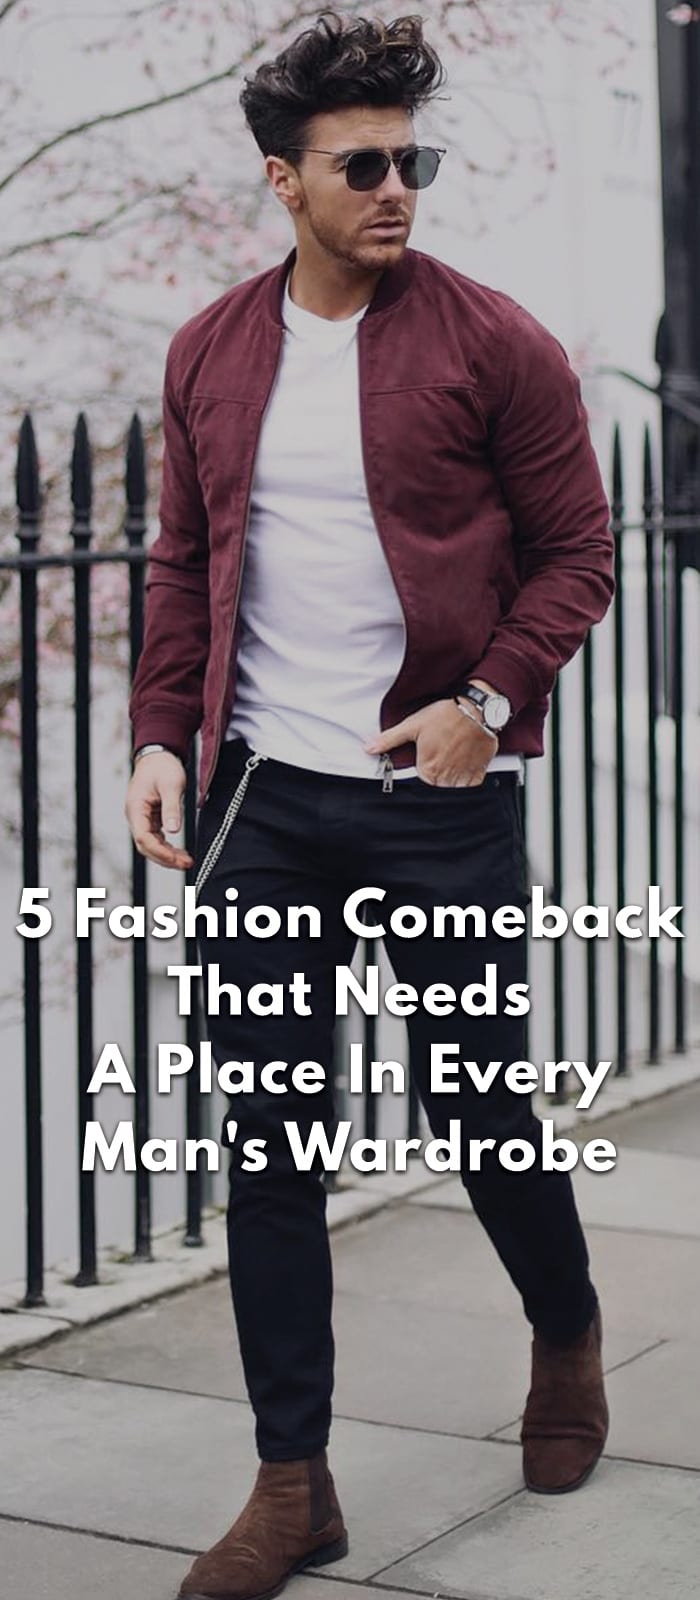 5-Fashion-Comeback-That-Needs-A-Place-In-Every-Man's-Wardrobe